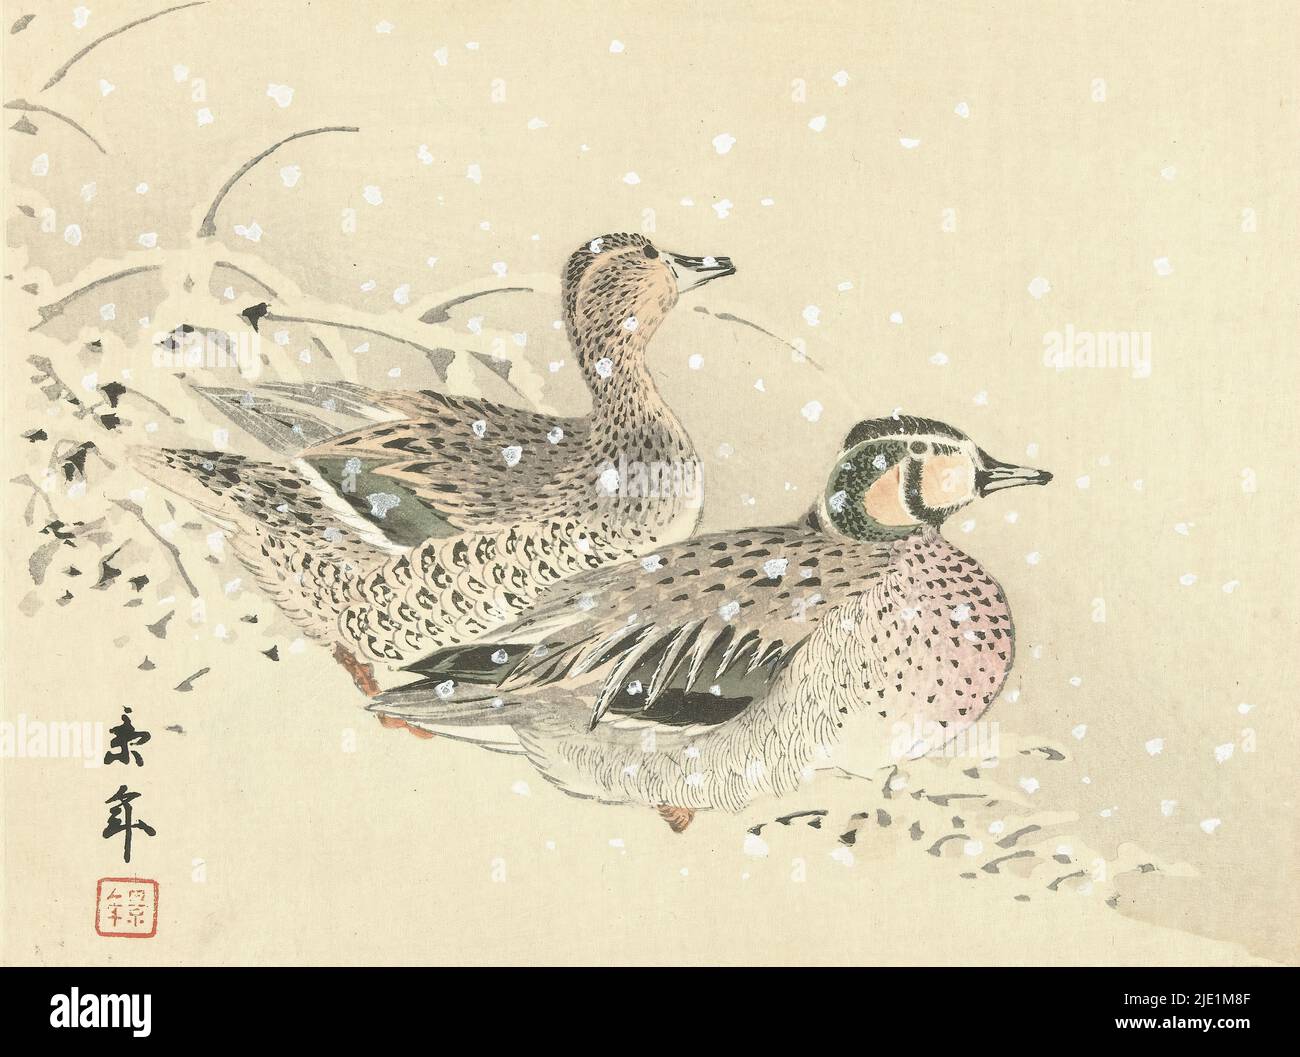 Couple of ducks in the snow, Floral and bird sketches by Keinen (series title), Keinen kacho gafu (series title on object), print maker: Imao Keinen, (mentioned on object), printer: Aoki Kôsaburô, publisher: Aoki Kôsaburô, (mentioned on object), print maker: Japan, printer: Osaka, publisher: Osaka, Nov-1892, paper, color woodcut, height 209 mm × width 275 mm Stock Photo